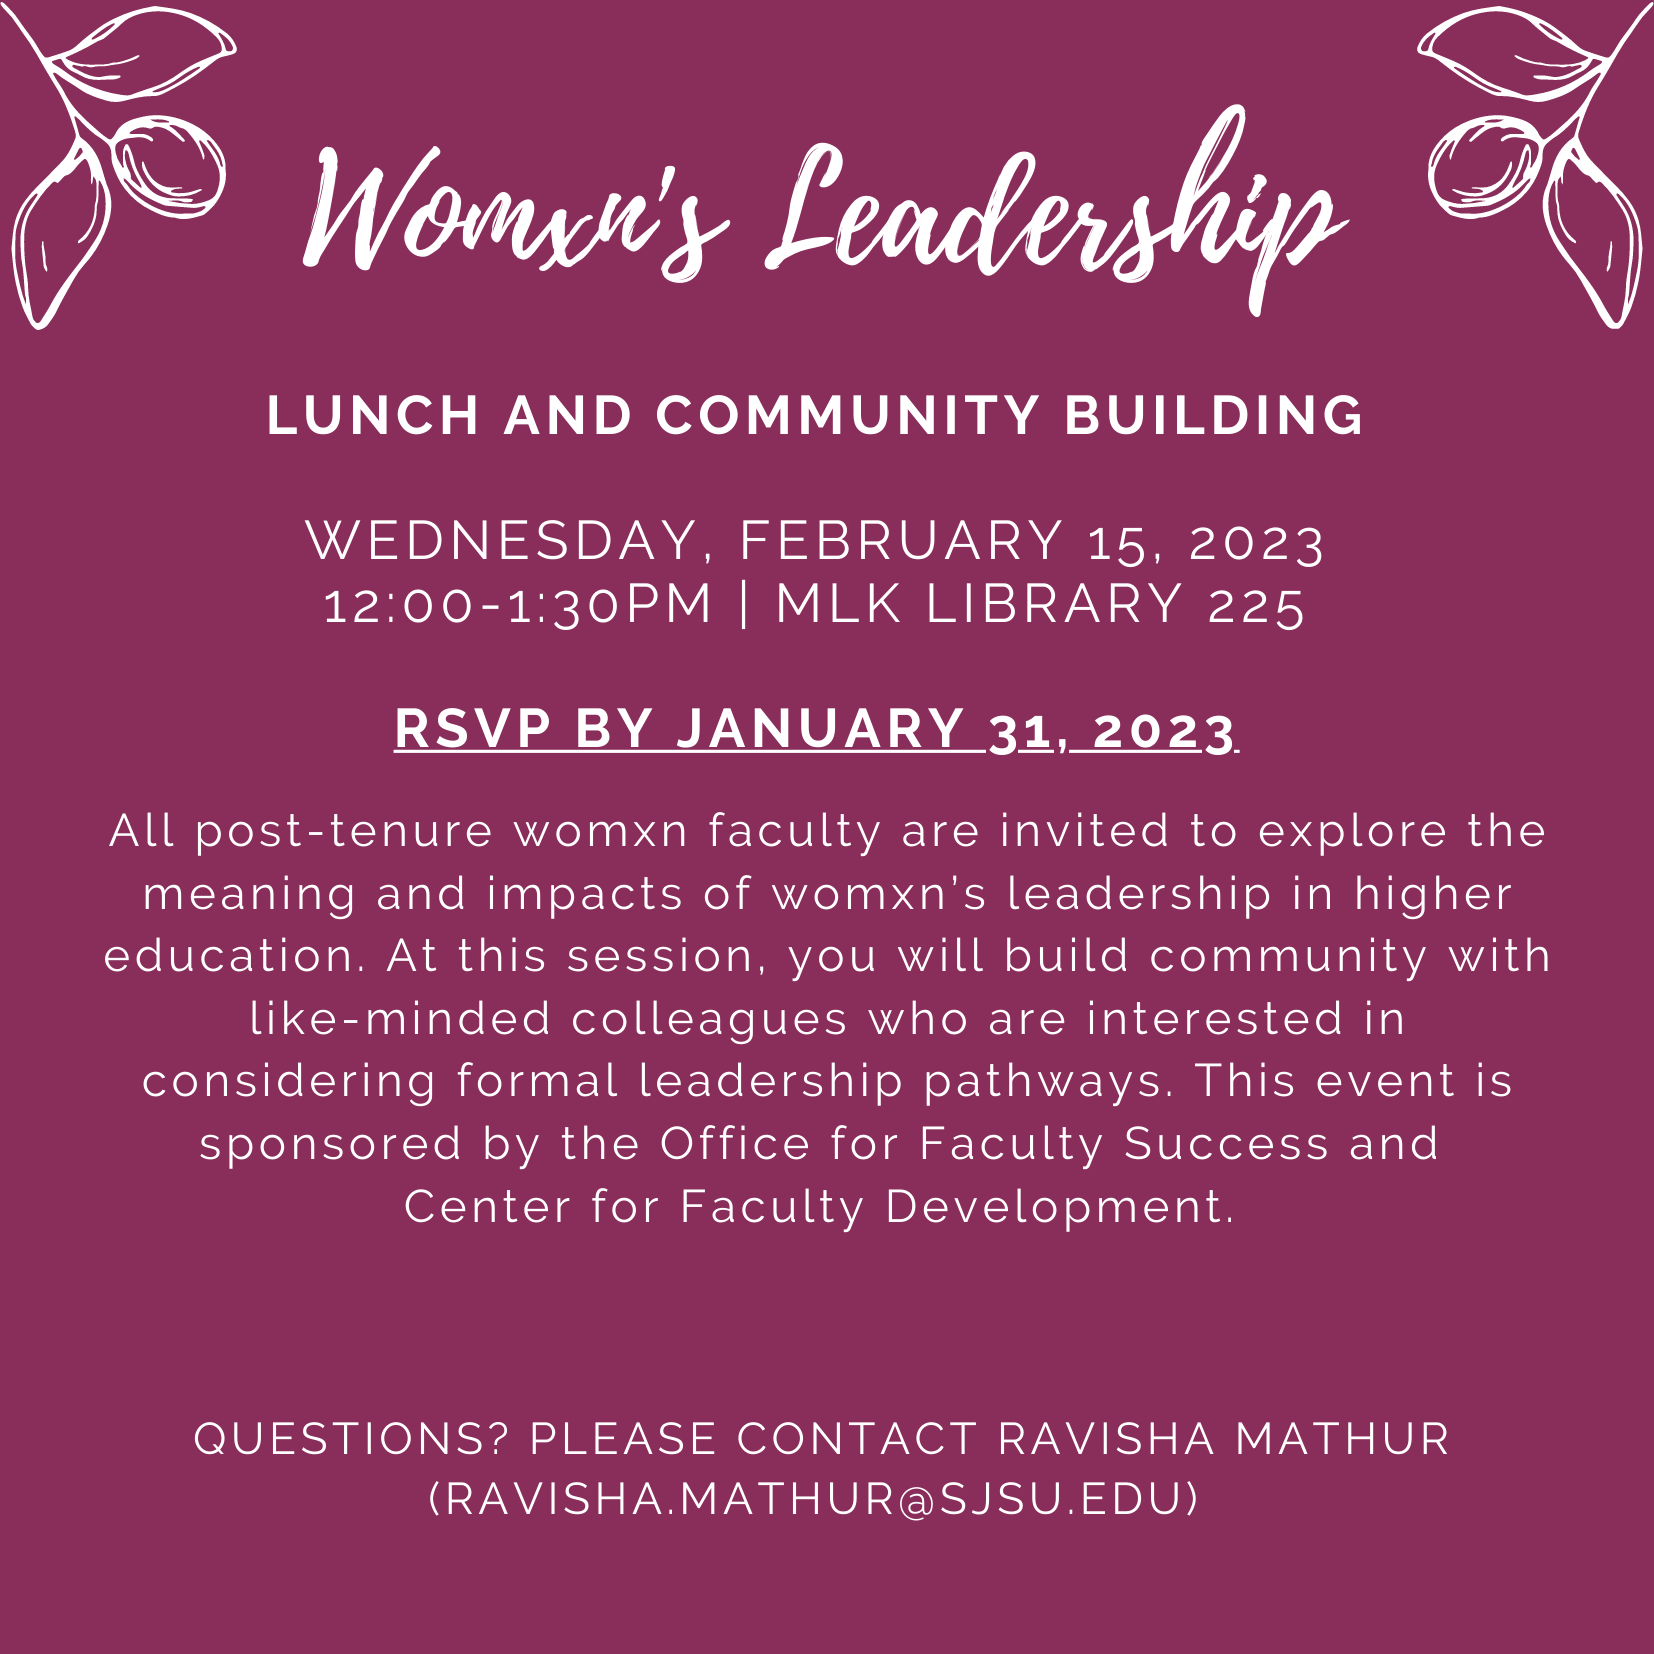 image of invite to the women's leadership luncheon